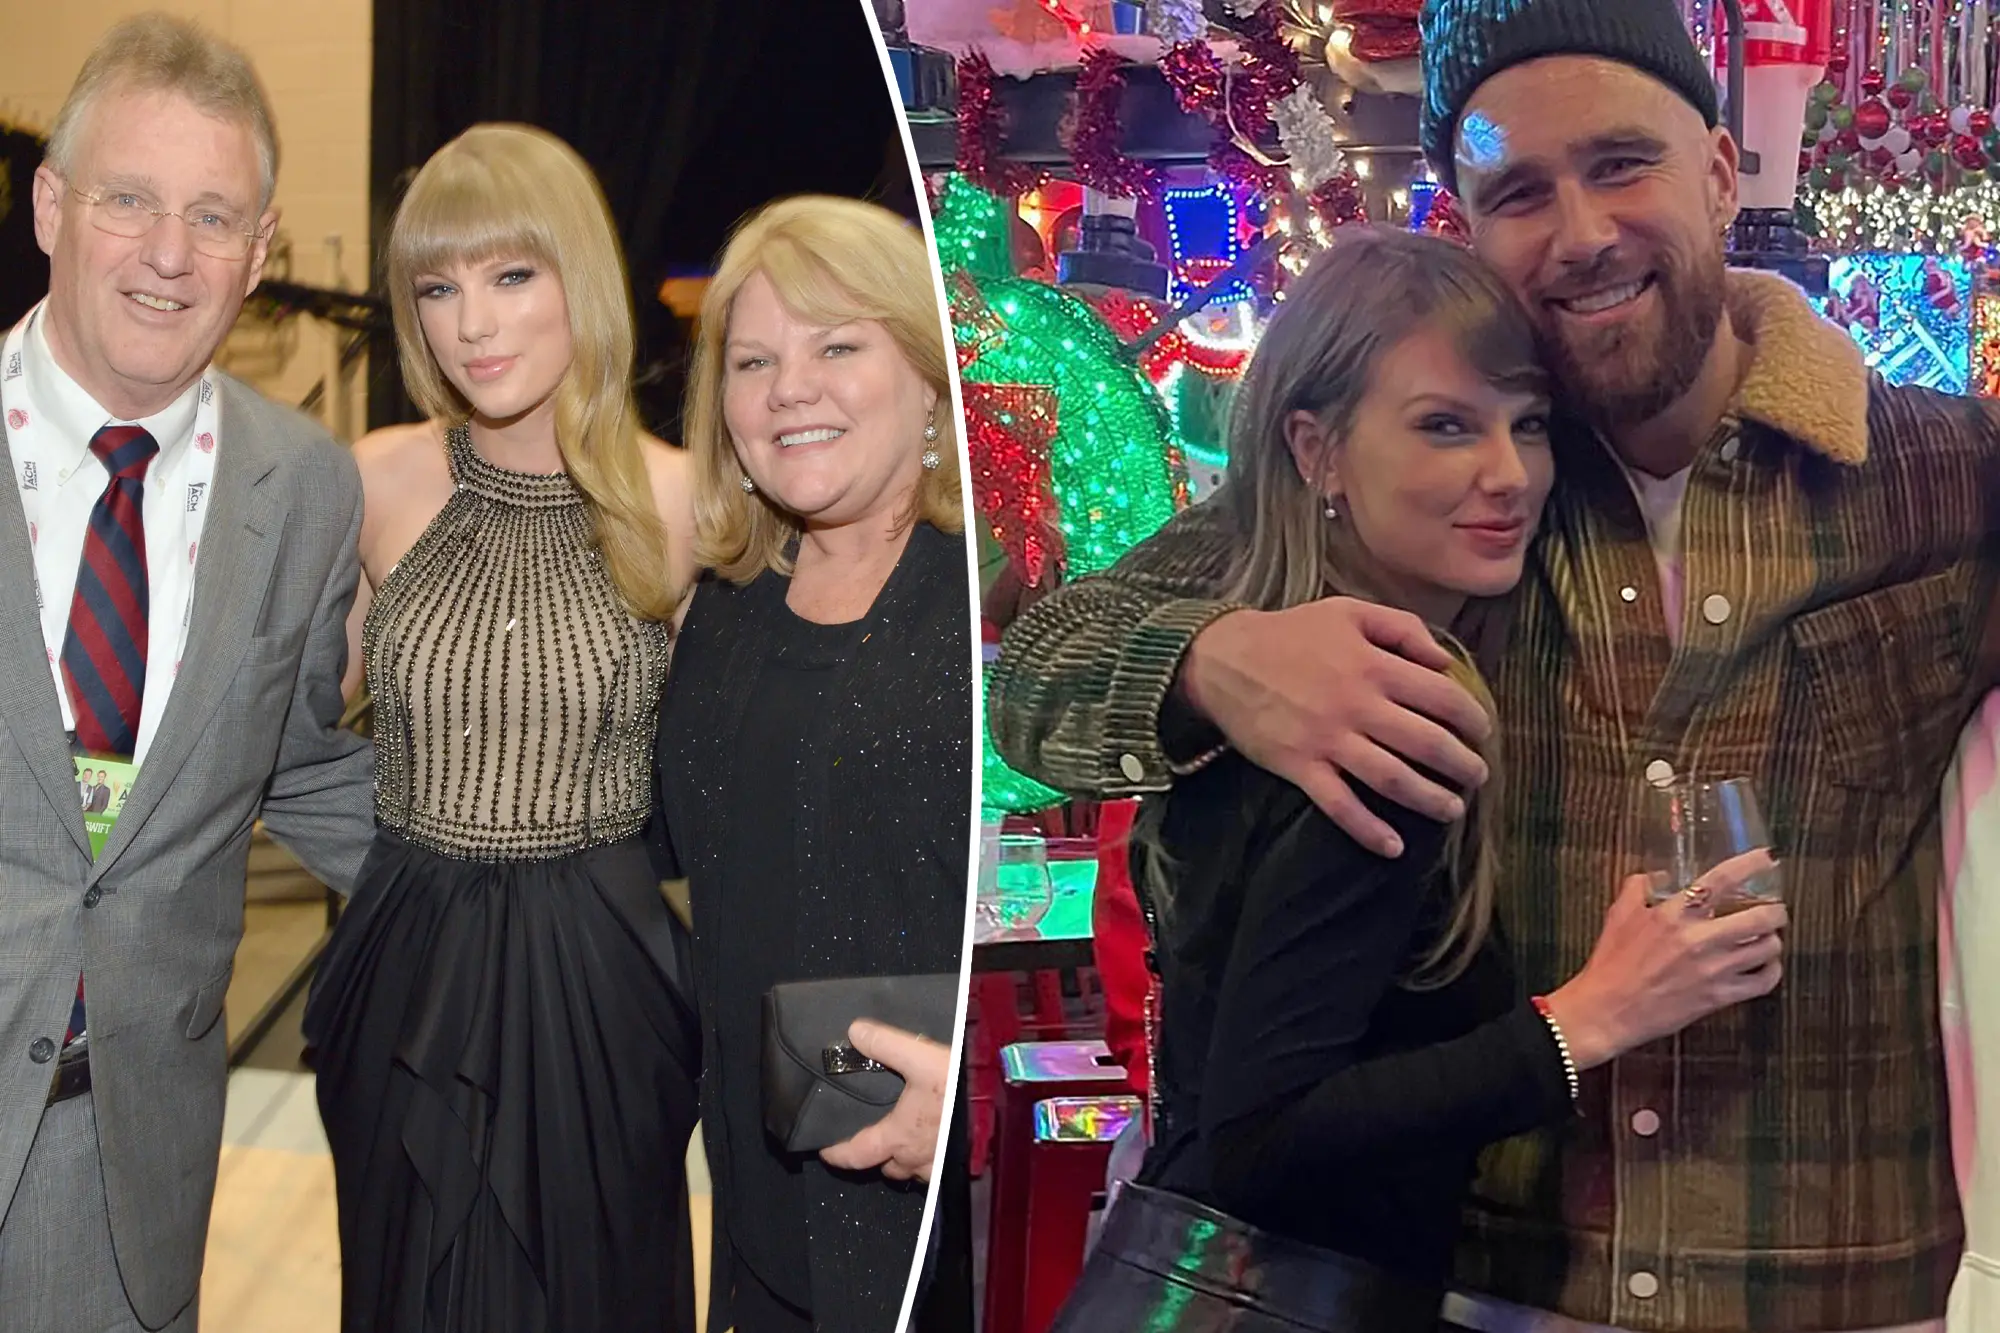 "Taylor Swift's Family Embraces Travis Kelce: Relief as Singer Finds Love with 6'5 NFL Star, Seen as a 'Built-In Bodyguard' Offering Safety Amid Past Controversy"